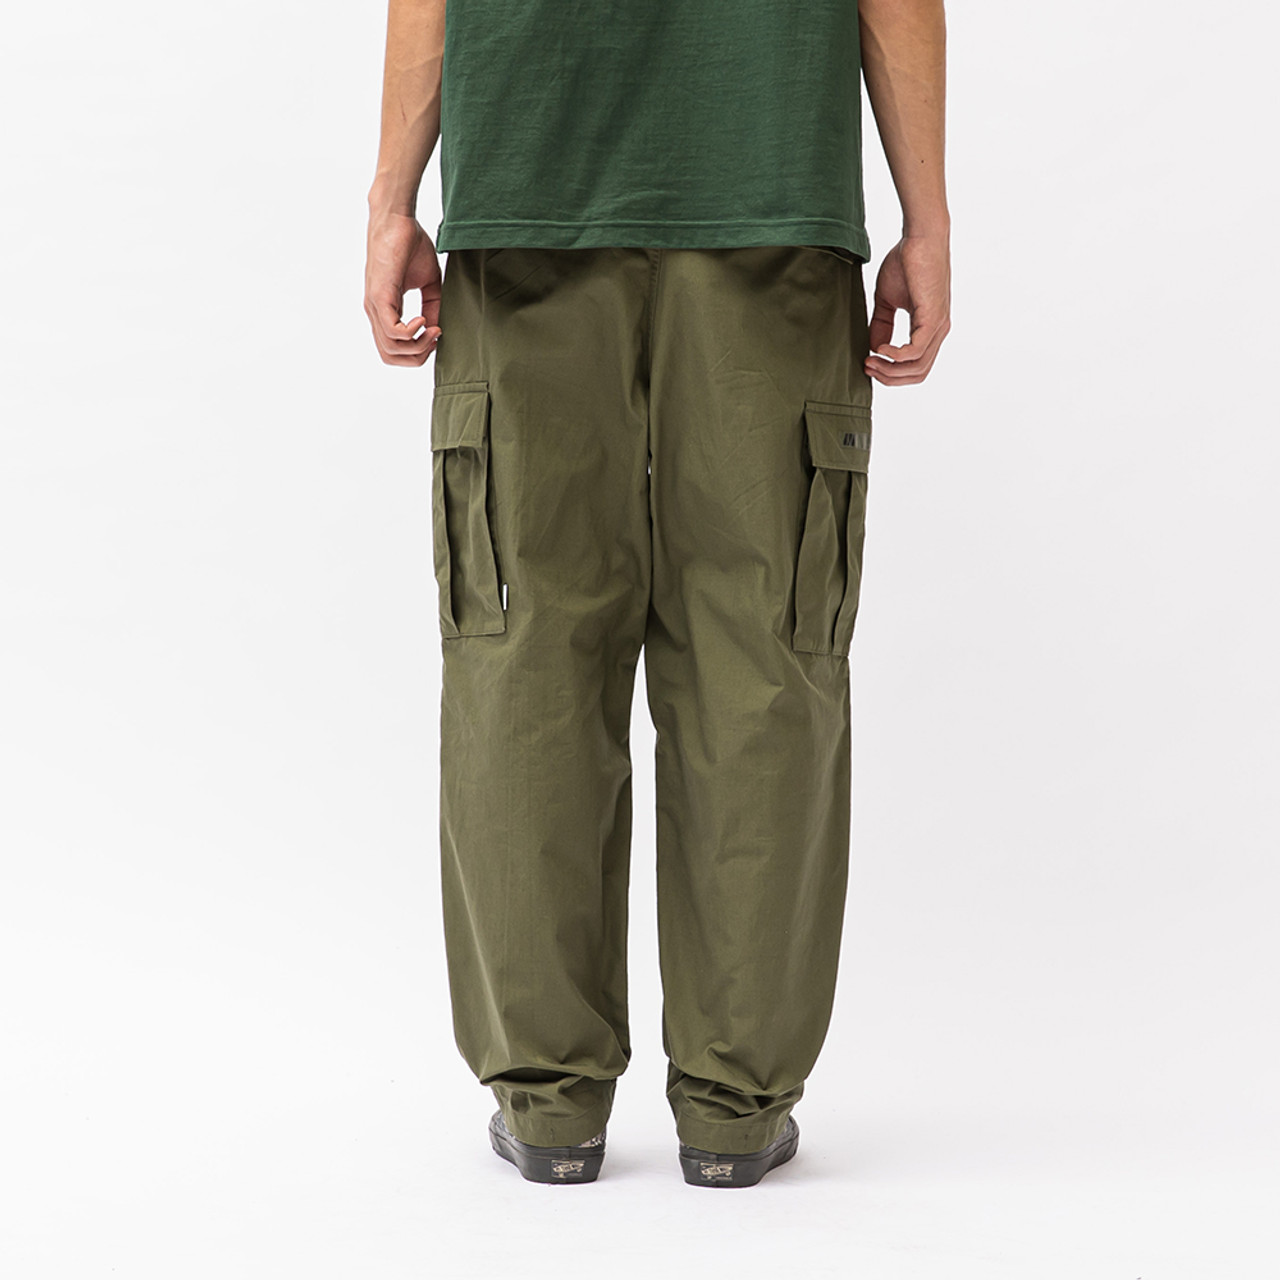 JUNGLE STOCK / TROUSERS / NYCO. RIPSTOP 222WVDT-PTM07